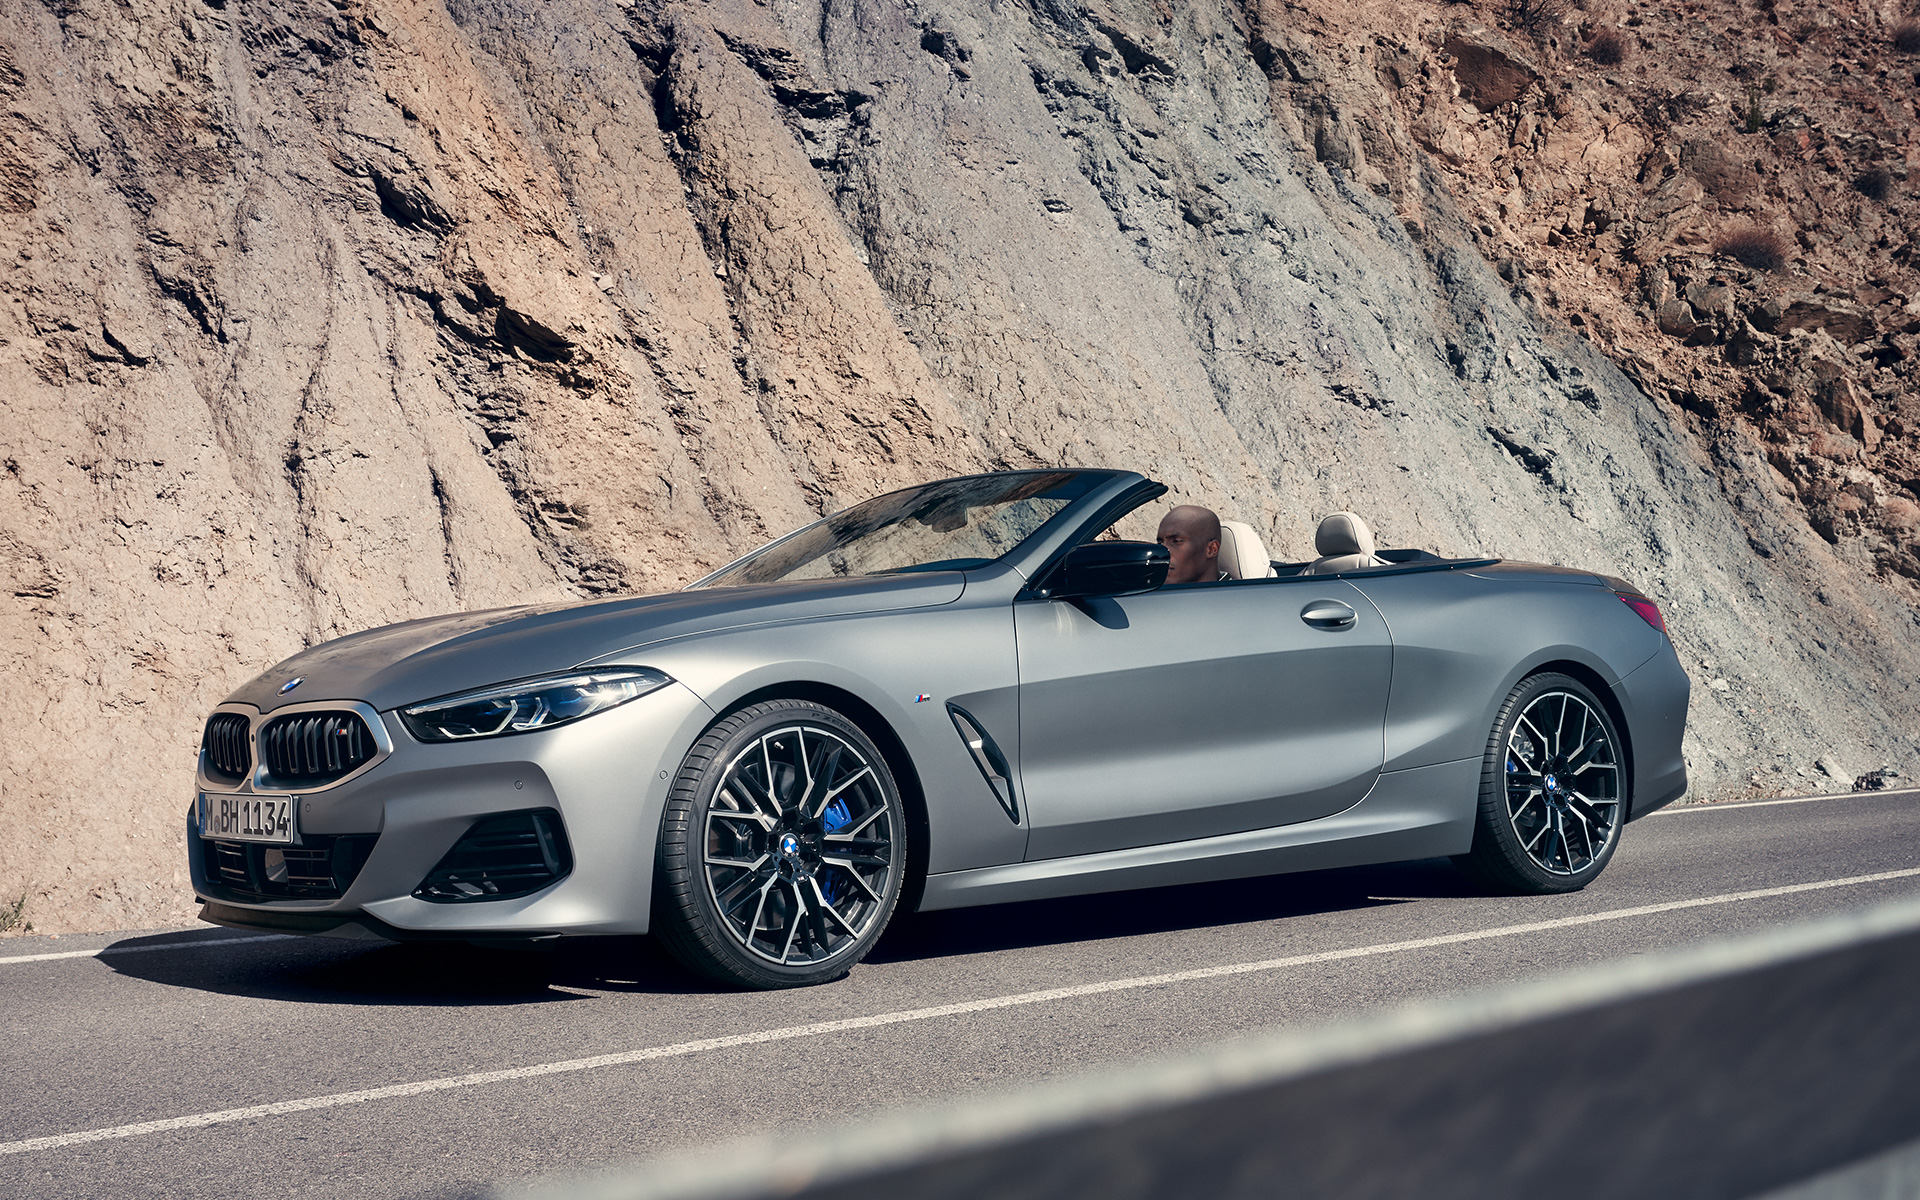 BMW M850i xDrive Convertible G14 LCI Facelift 2022 BMW Individual Frozen Pure Grey metallic three quarter front view driving in front of cliff face